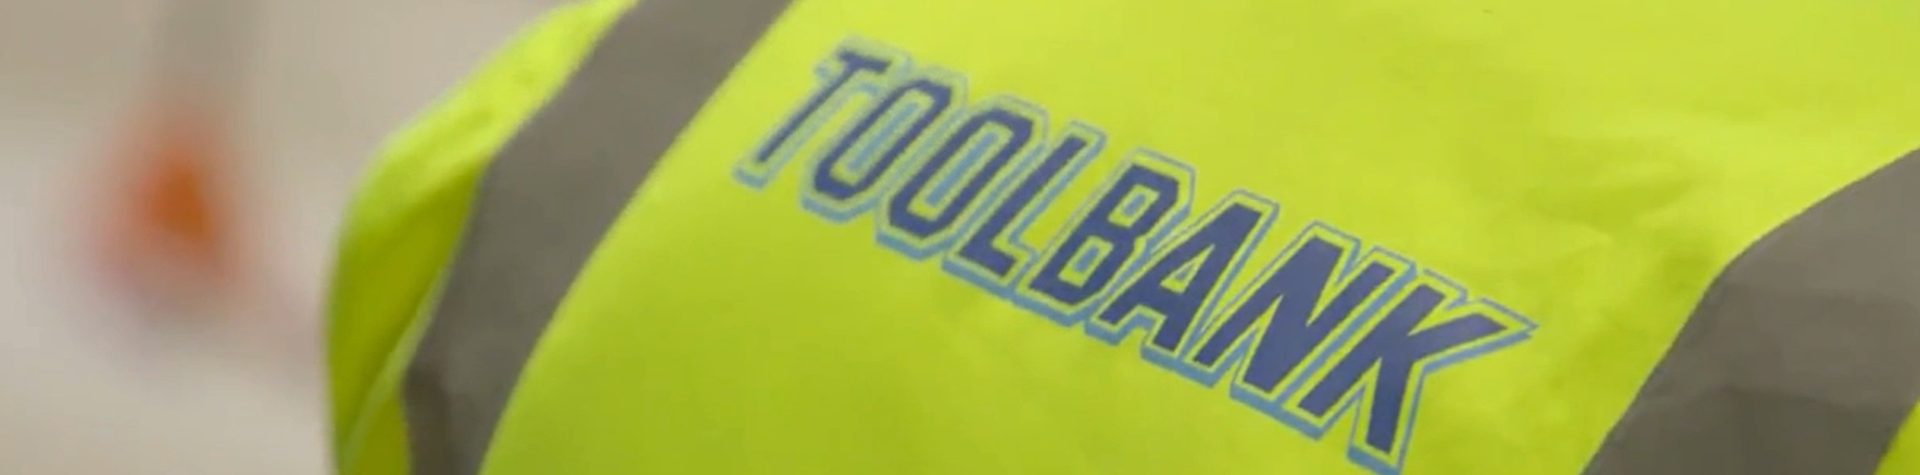 National Power Tool Distribution Group, Toolbank case study